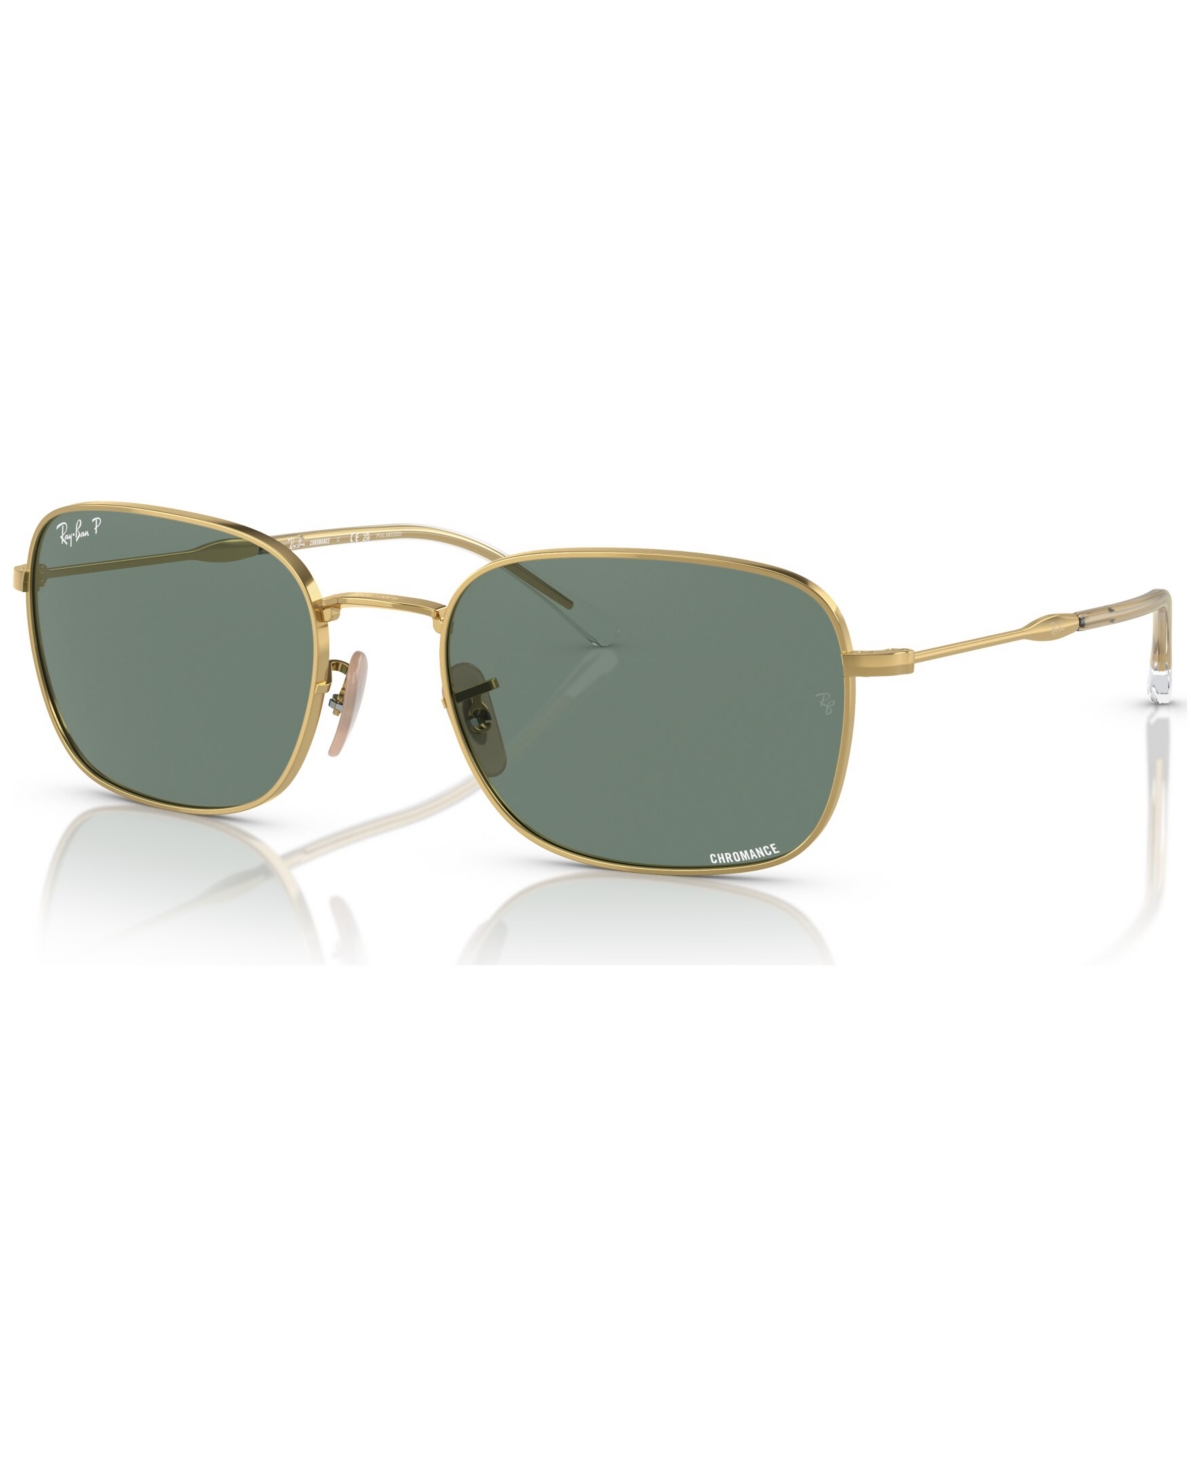 Ray Ban Ray-ban Unisex Polarized Sunglasses, Rb3706 In Gold-tone